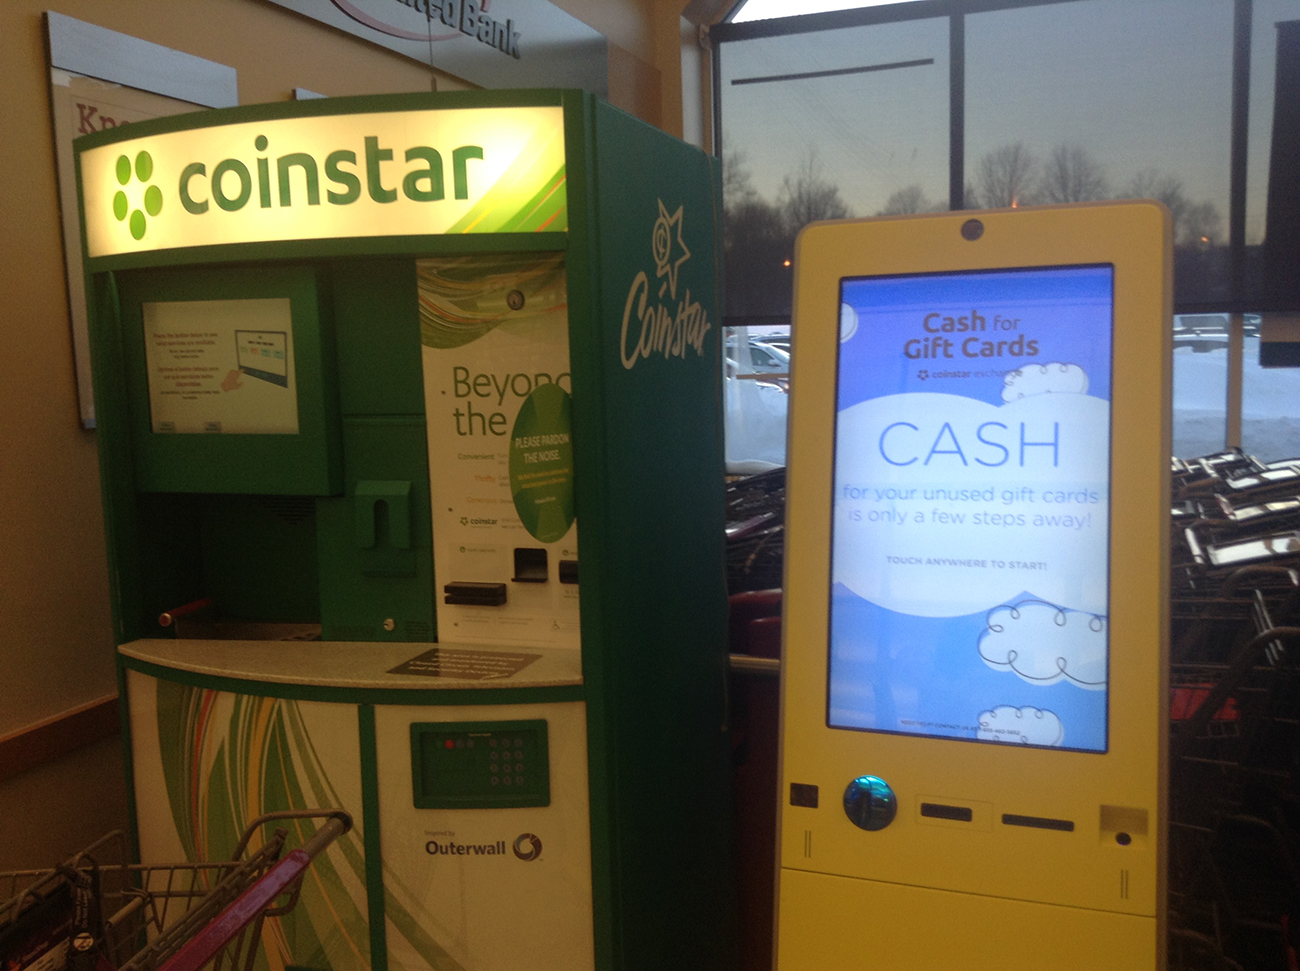 Photograph shows a coin star machine beside a cash for gift cards machine.